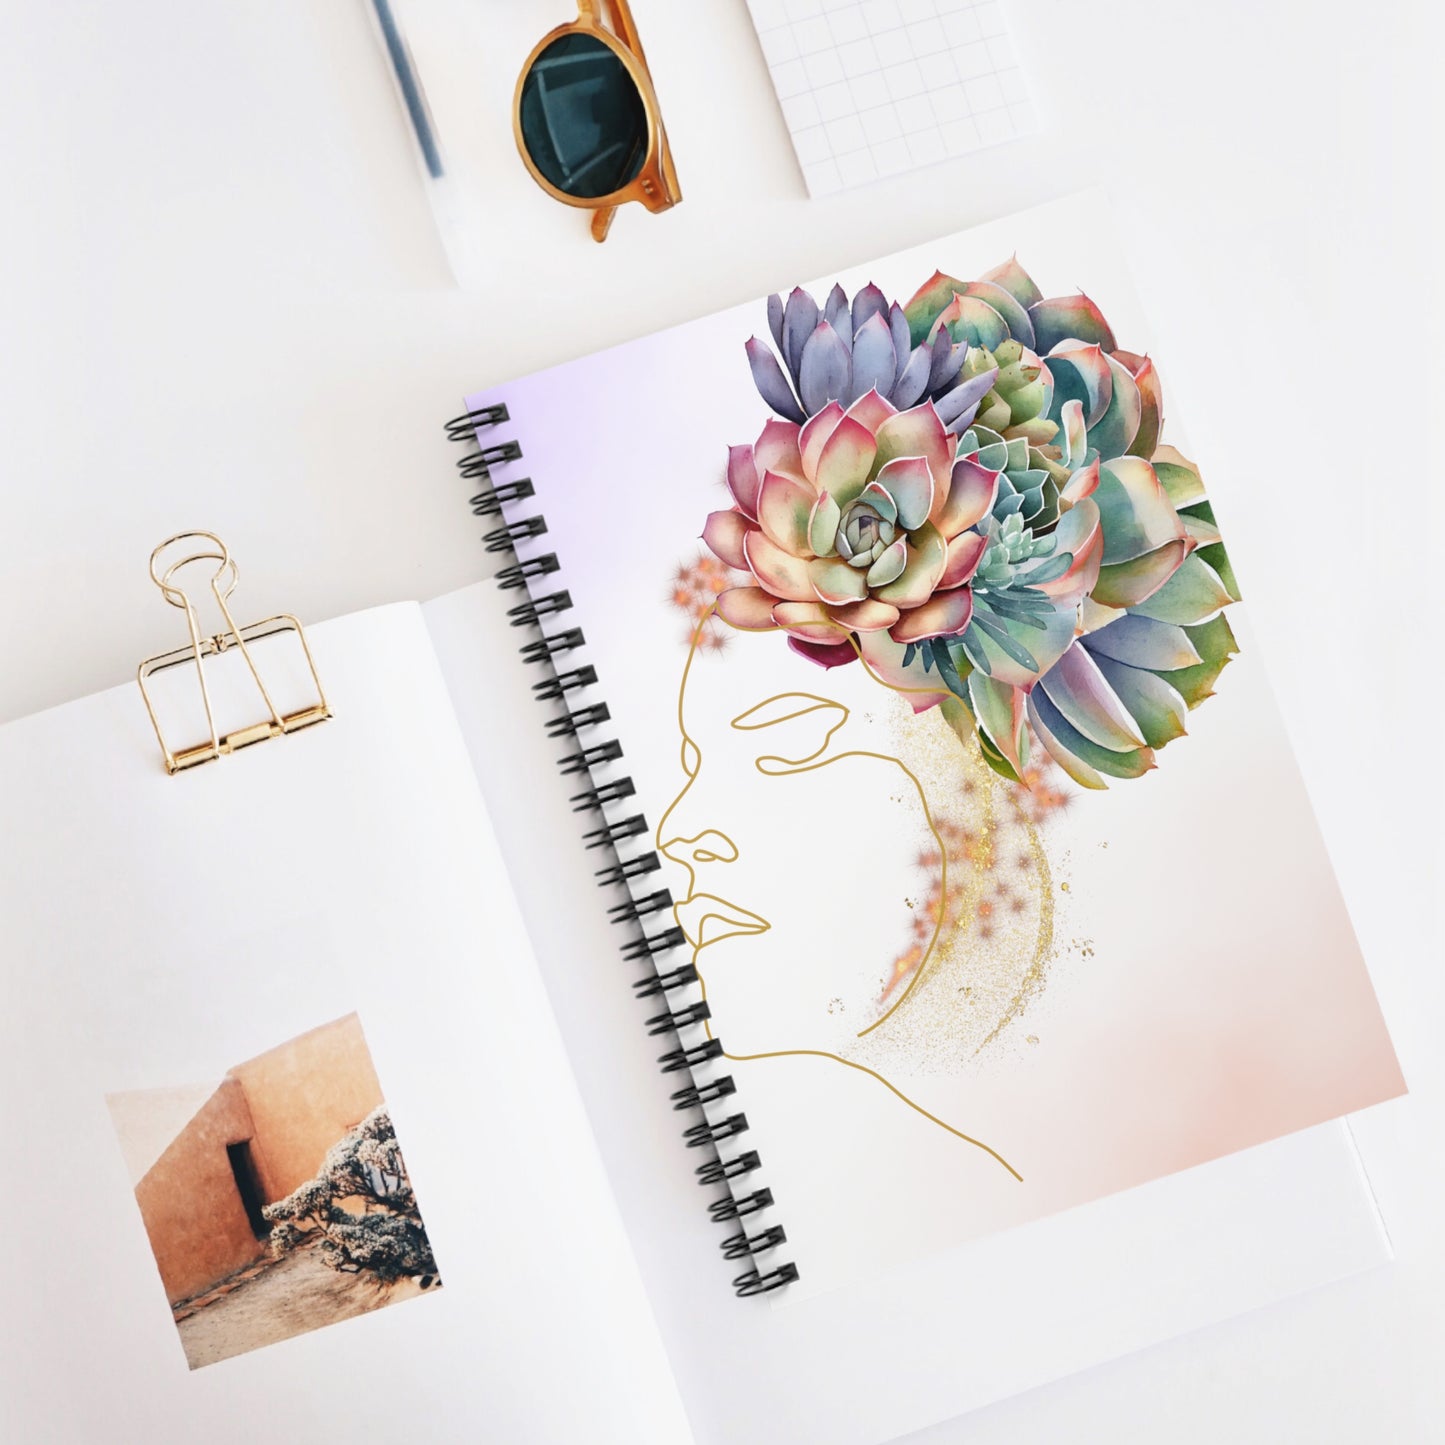 Succulent Love: Spiral Notebook - Log Books - Journals - Diaries - and More Custom Printed by TheGlassyLass.com